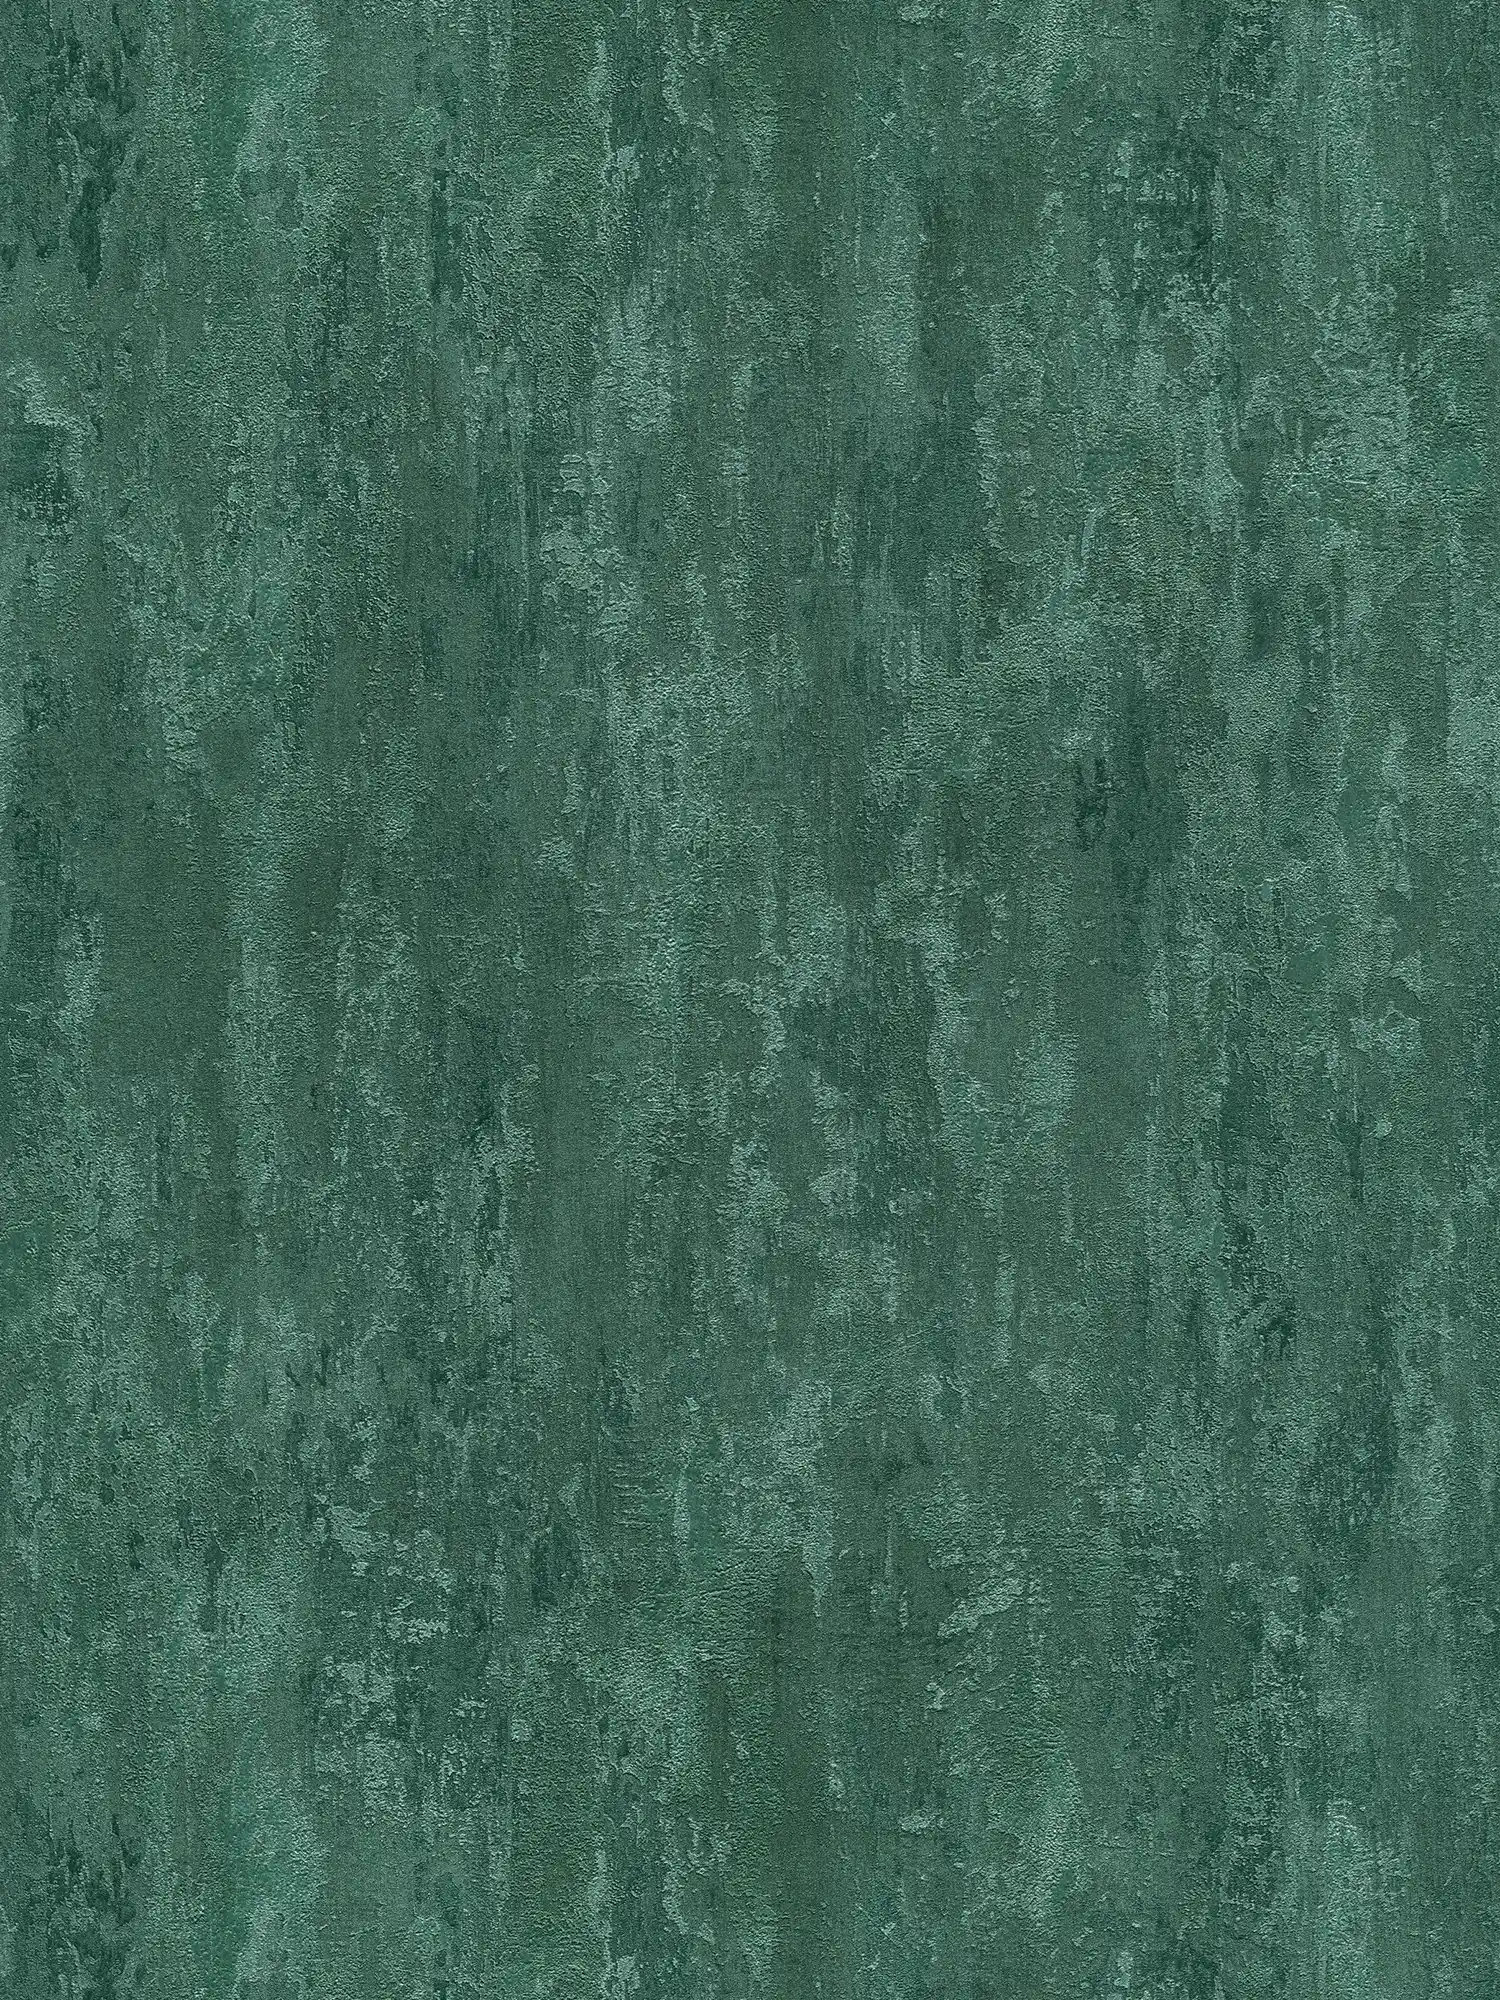         Wallpaper industrial style with texture effect - green, metallic
    